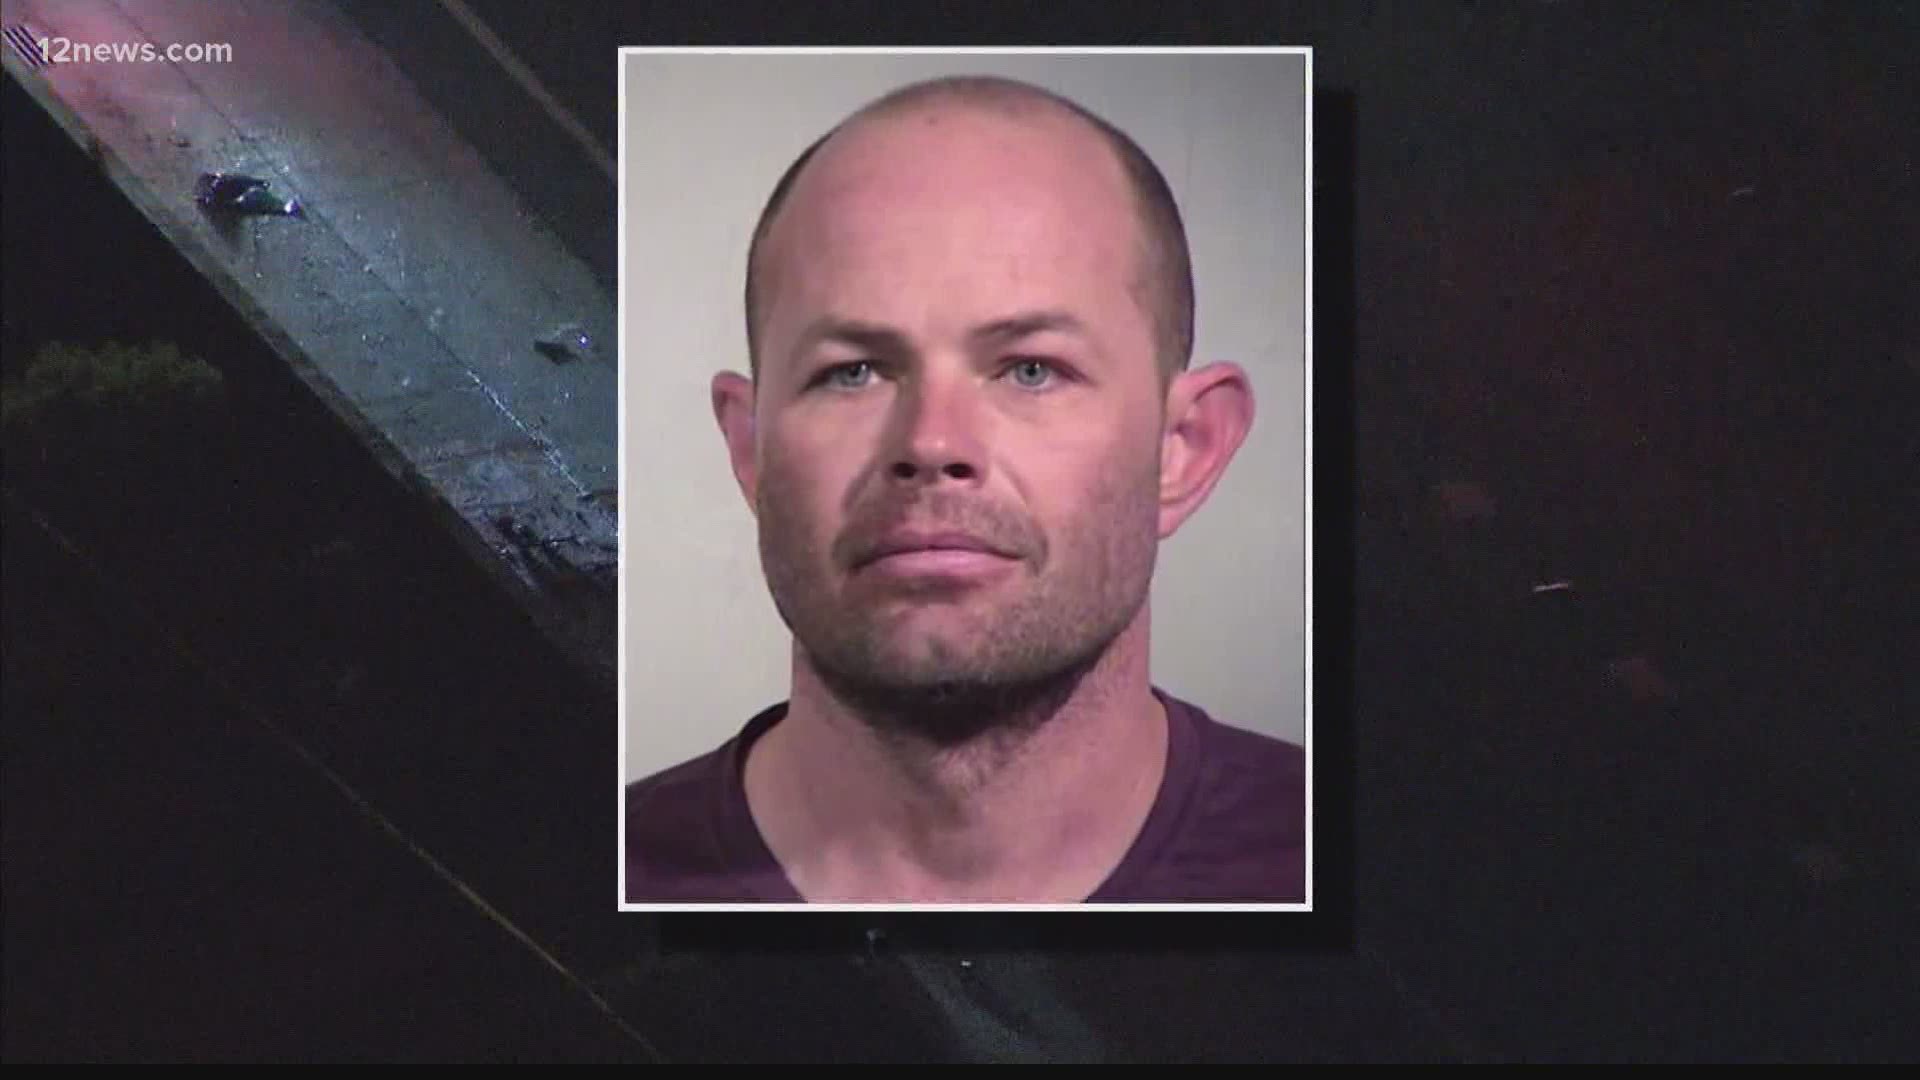 The man once accused of texting and driving, causing an accident that killed a Salt River police officer, will have the case against him dropped.